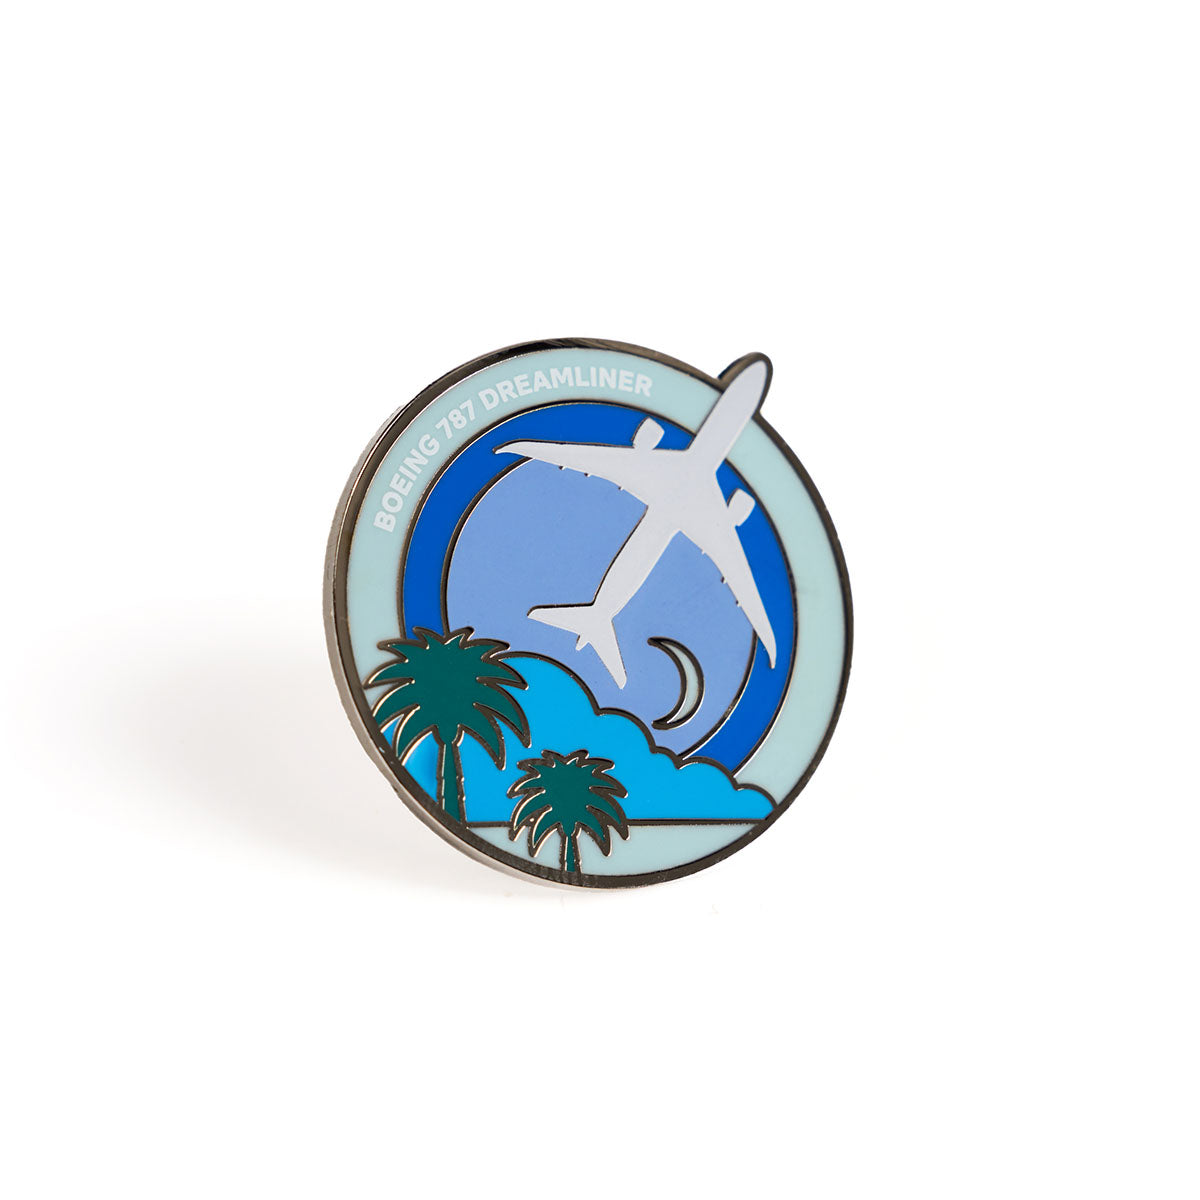 Skyward lapel pin, featuring the iconic Boeing 787 Dreamliner in an enamel roundel design.